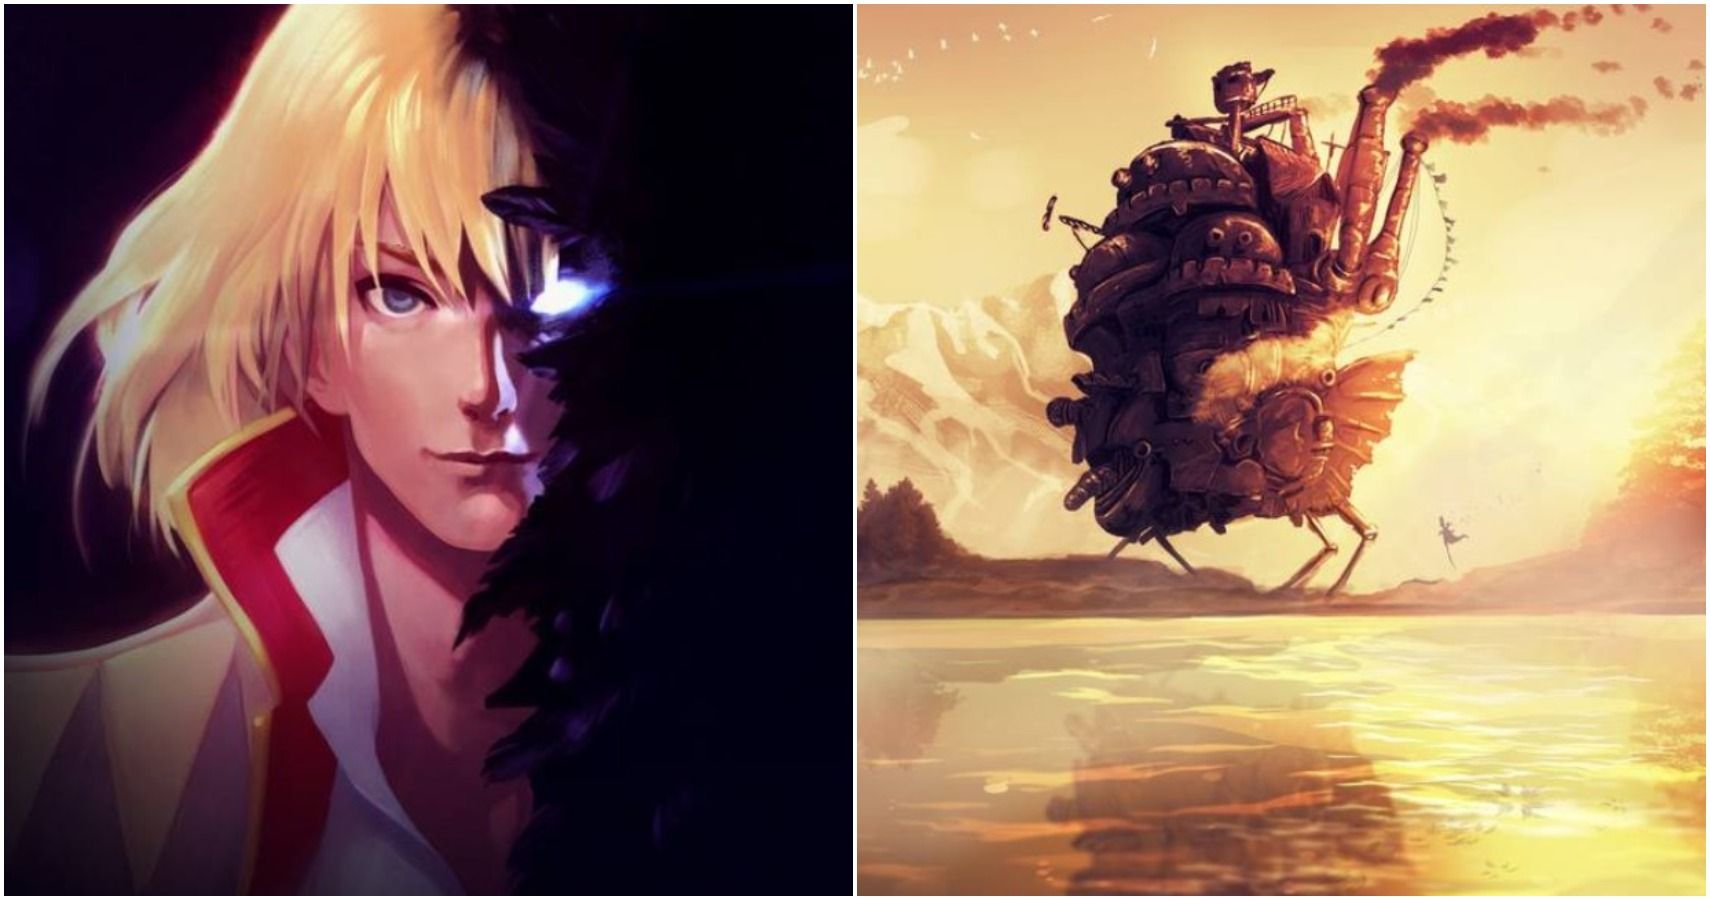 Howl's Moving Castle: 10 Pieces Of Fan Art That Are Magical As The Movie